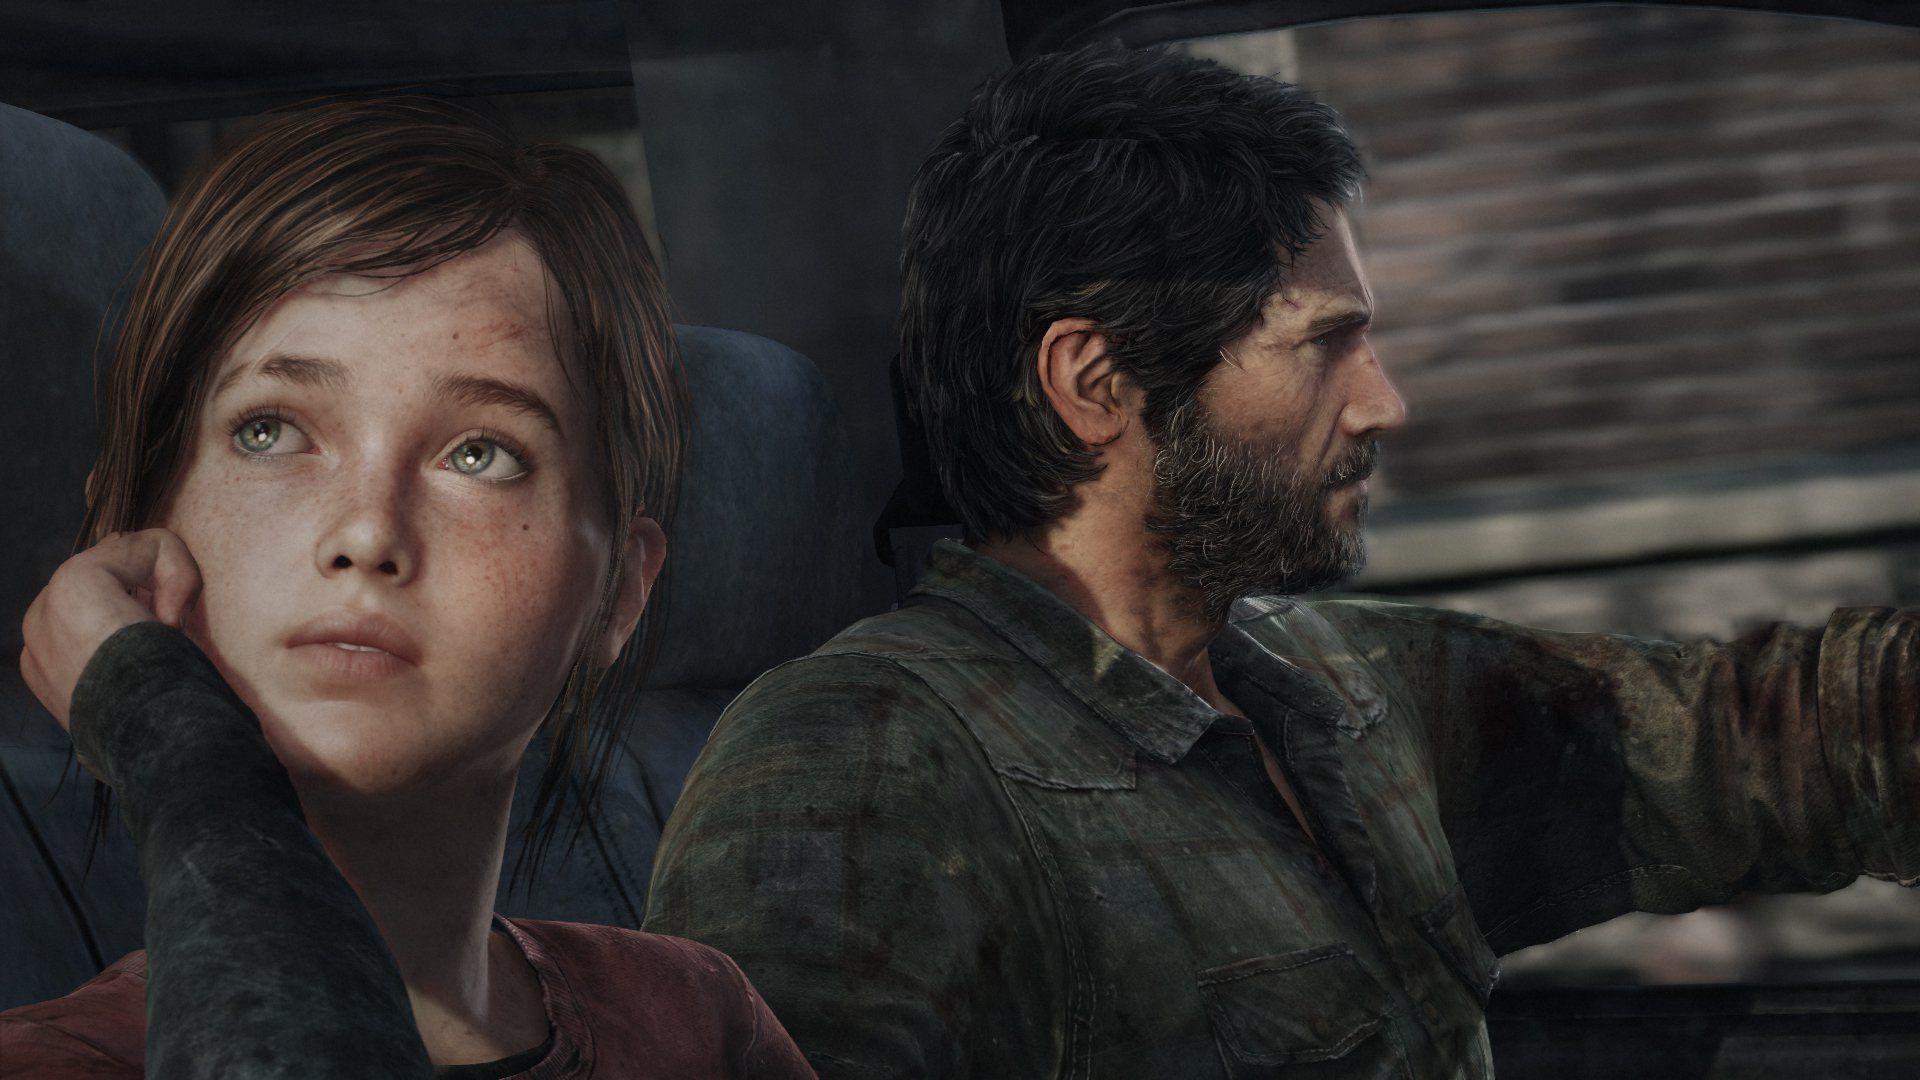 The Last of Us Part II 4K Wallpapers  HD Wallpapers  ID 30875